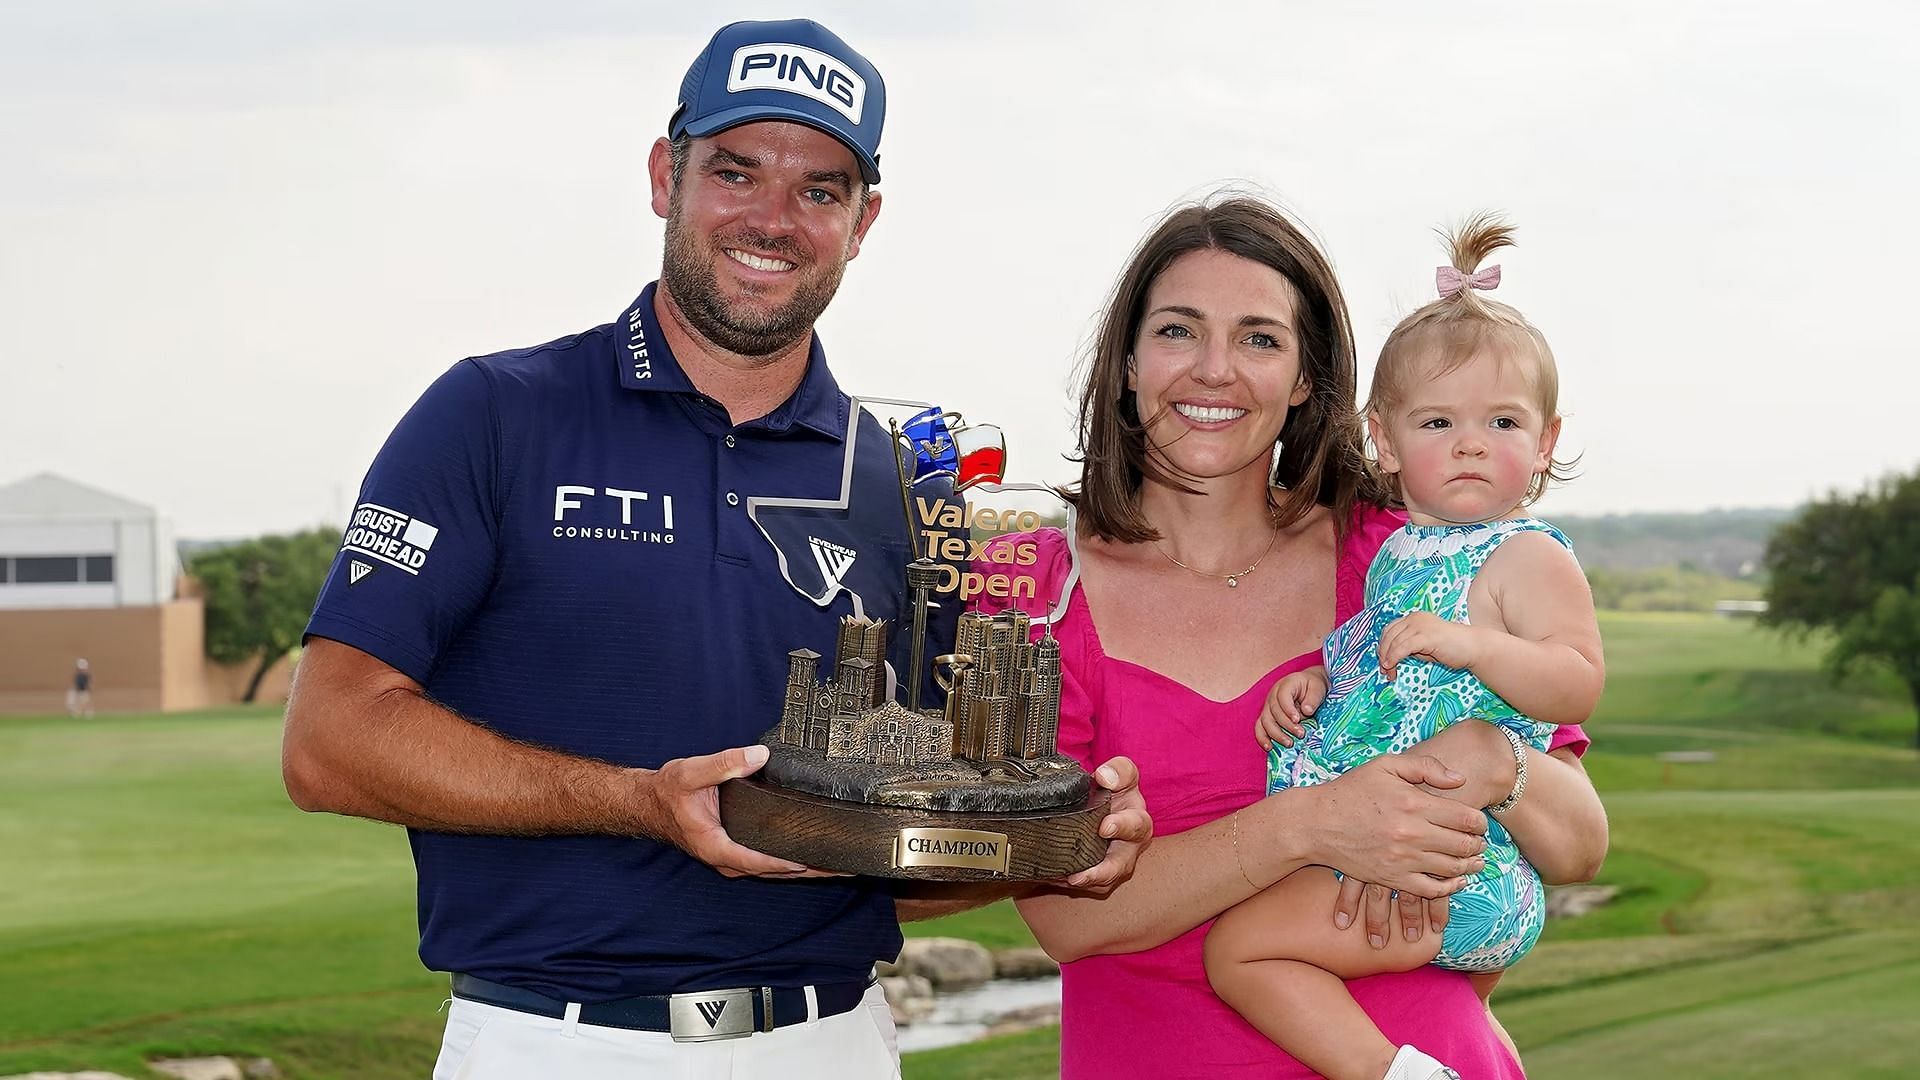 Corey Conners poses with his wife and daughter after Valero Texas Open victory